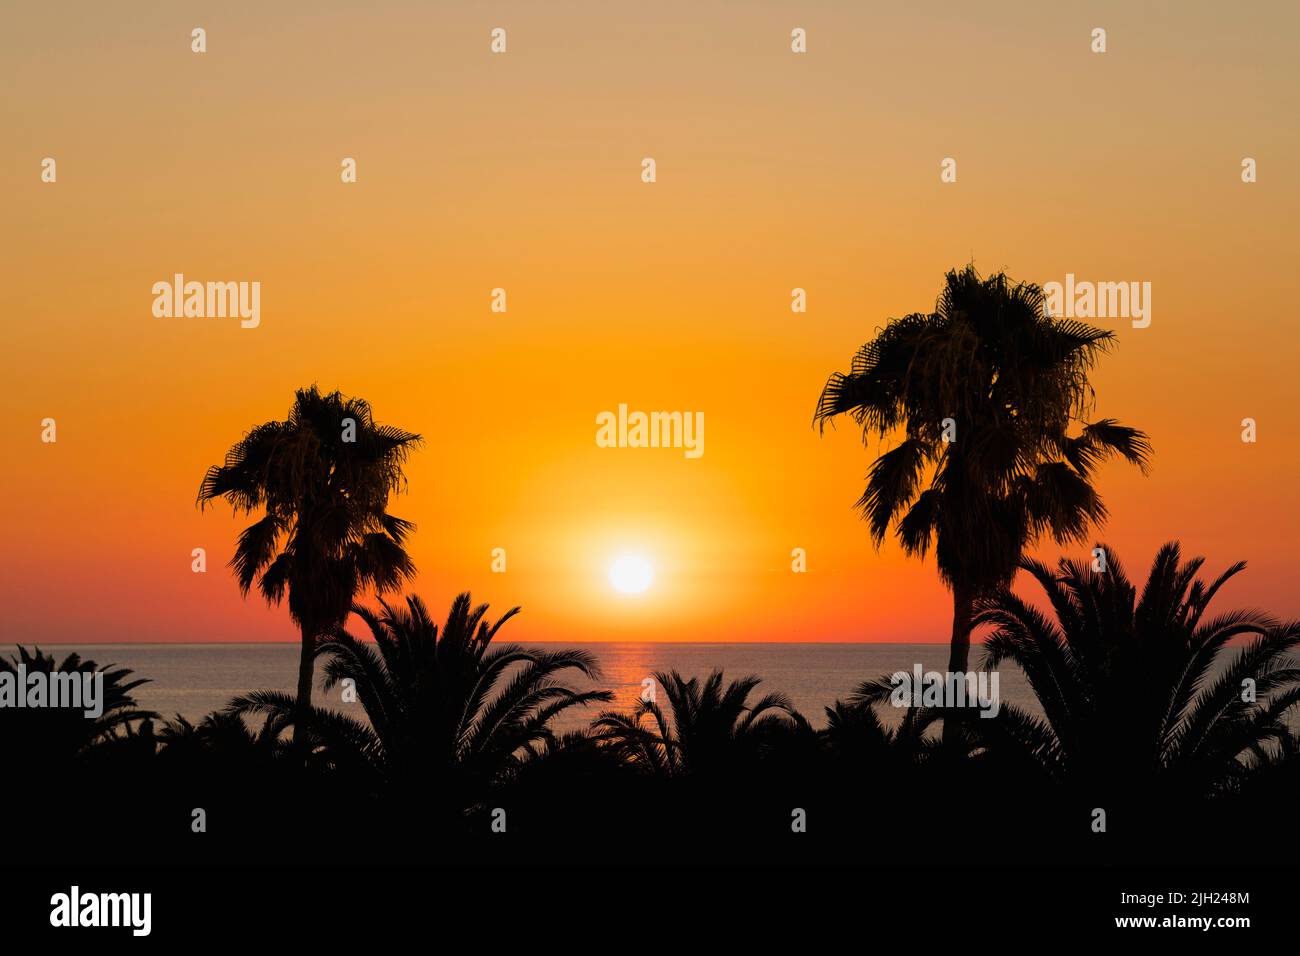 Sun setting over the sea with palm trees Stock Photo